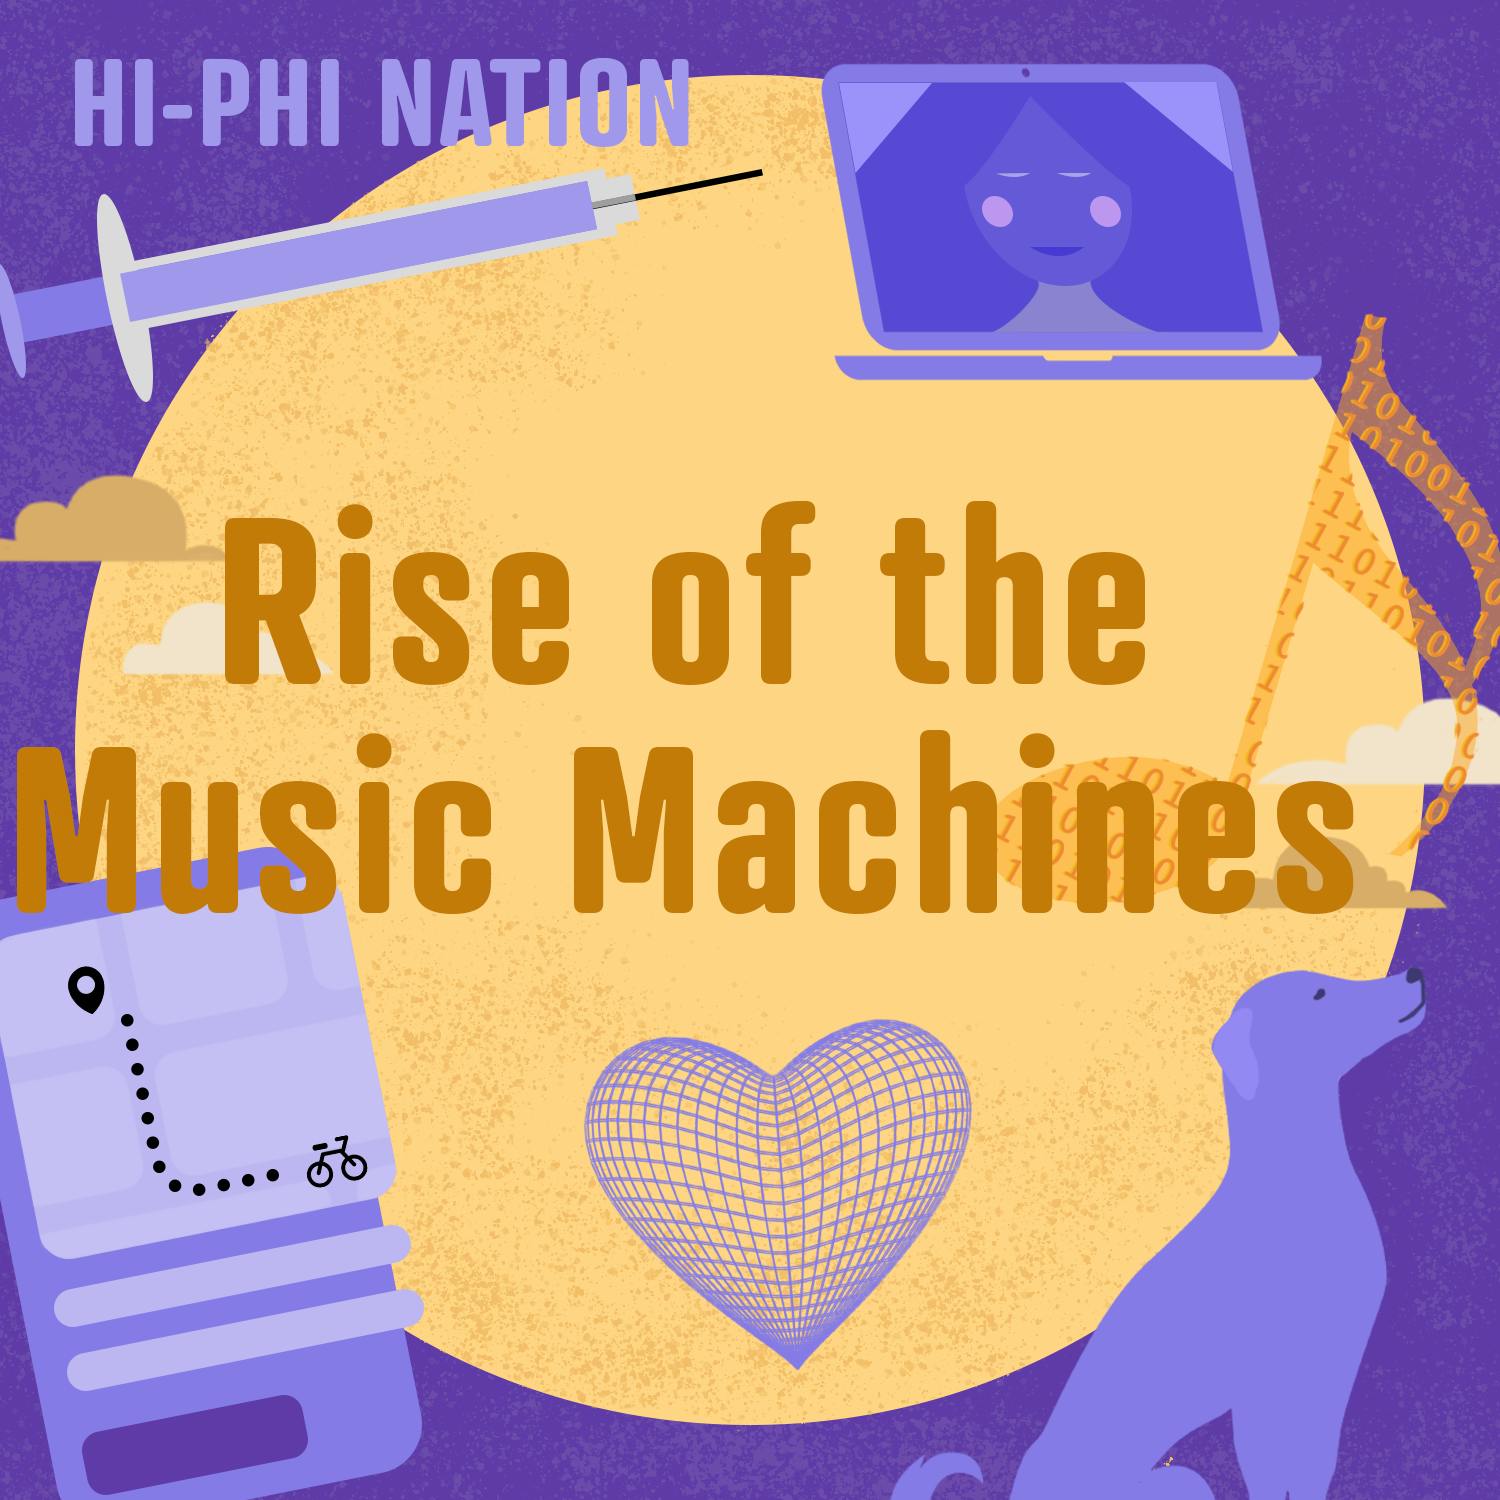 Hi-Phi Nation: Rise of the Music Machines